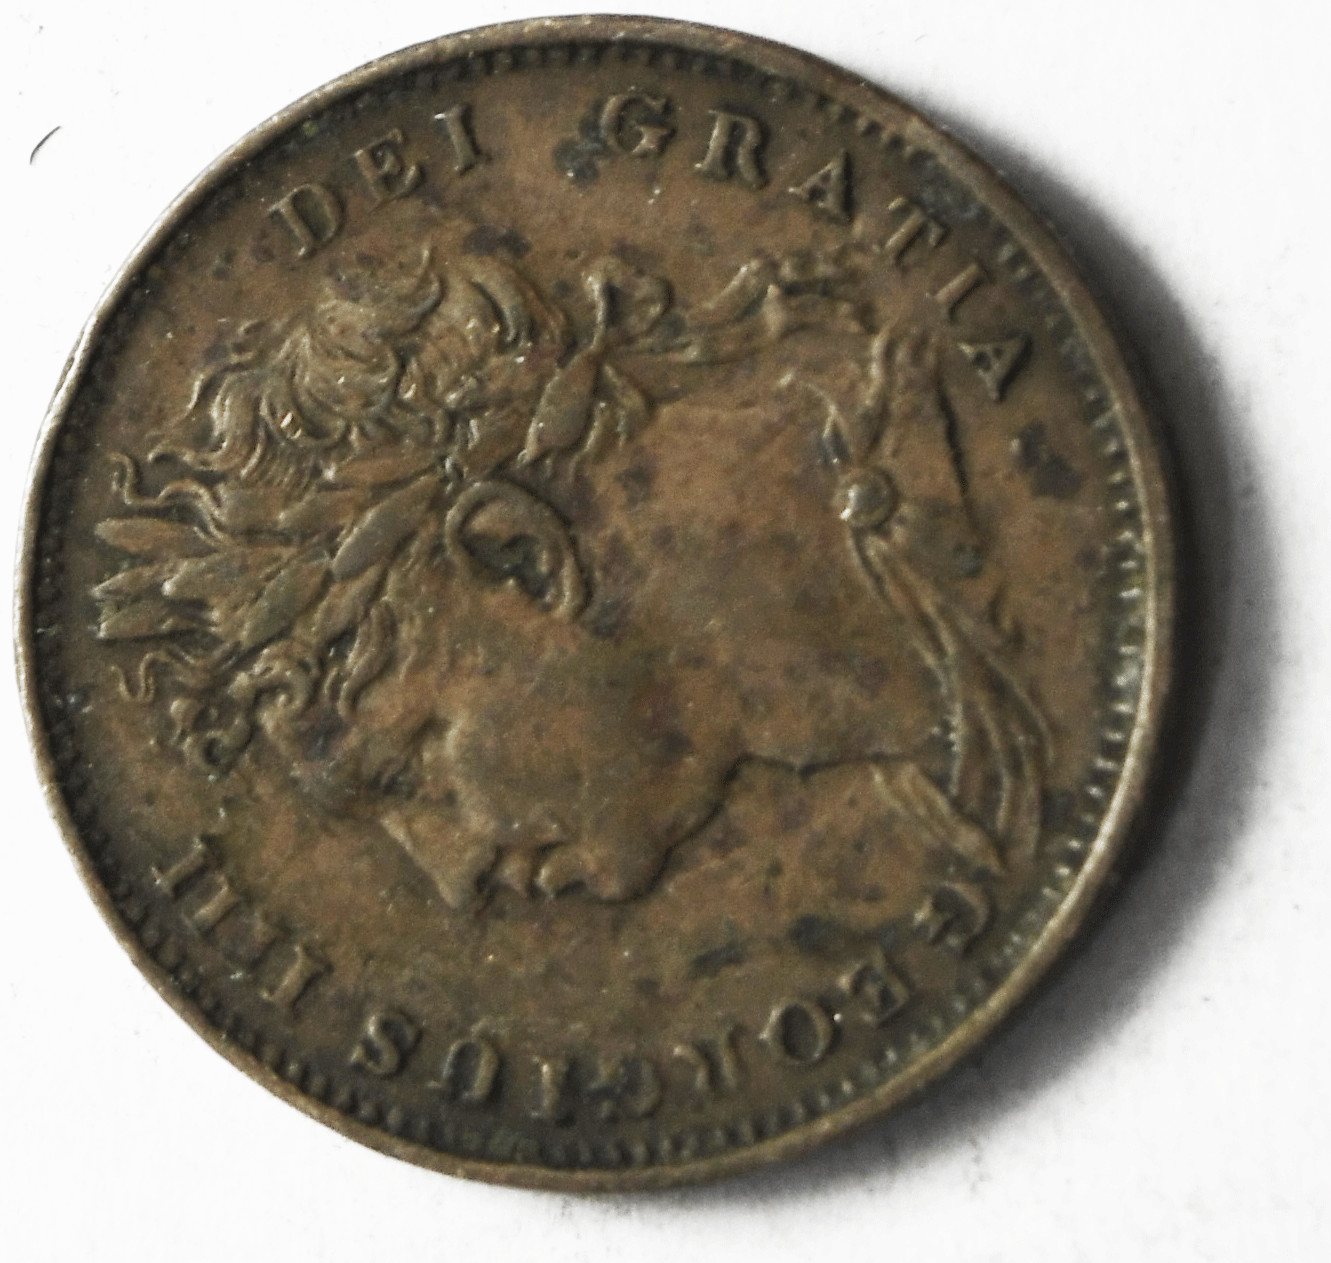 1826 Great Britain 1F Copper Farthing Dot After Date Rare KM#677